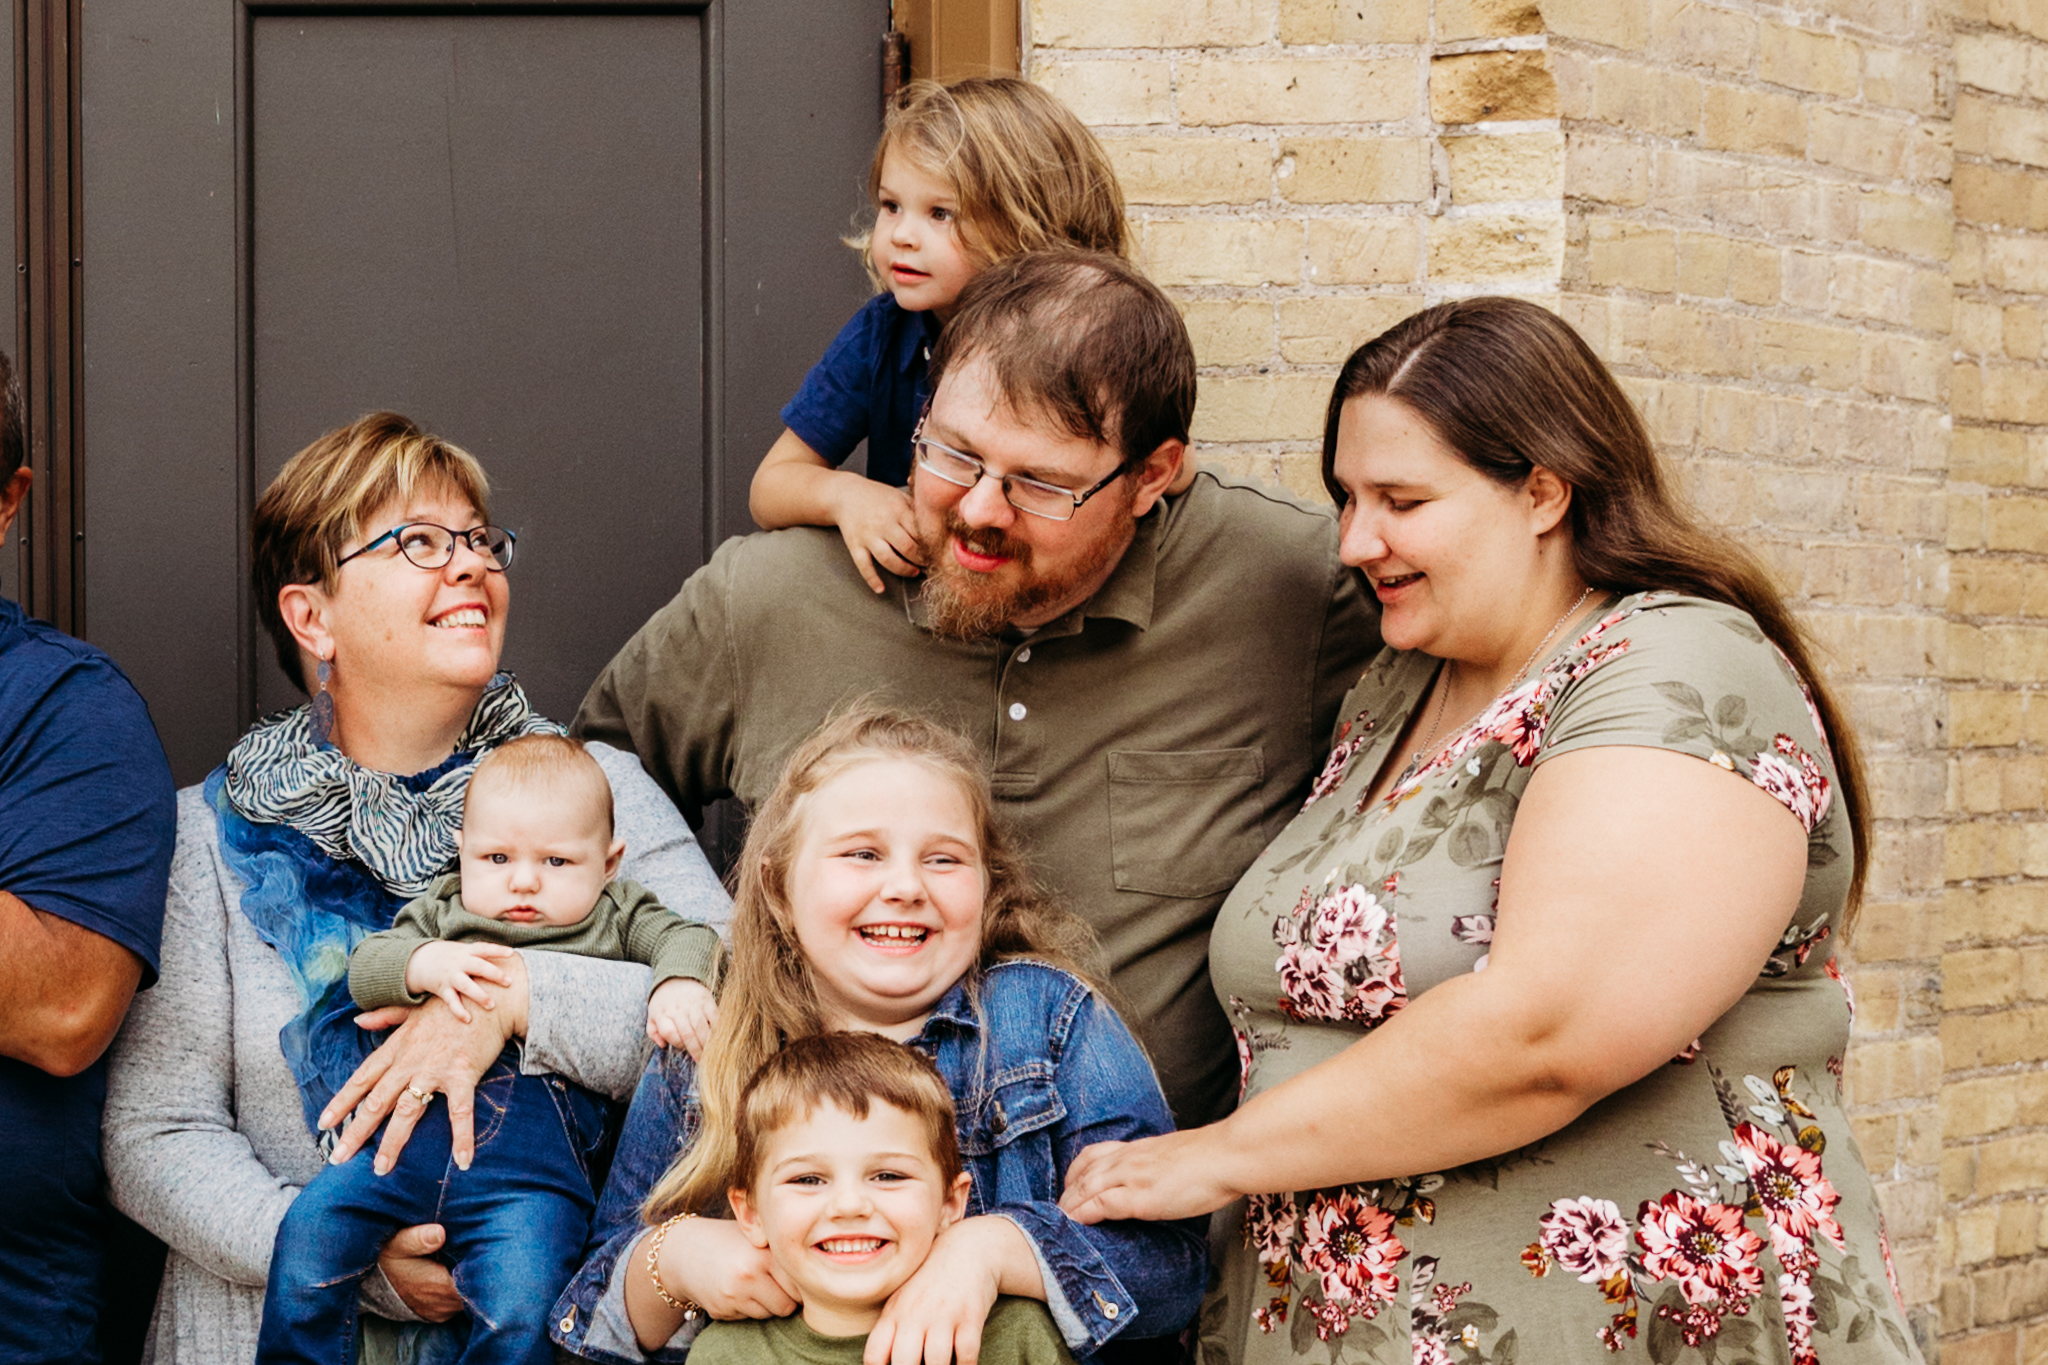 Things to do in Appleton, WI. Family spending time downtown by Ashley Kalbus Photography.